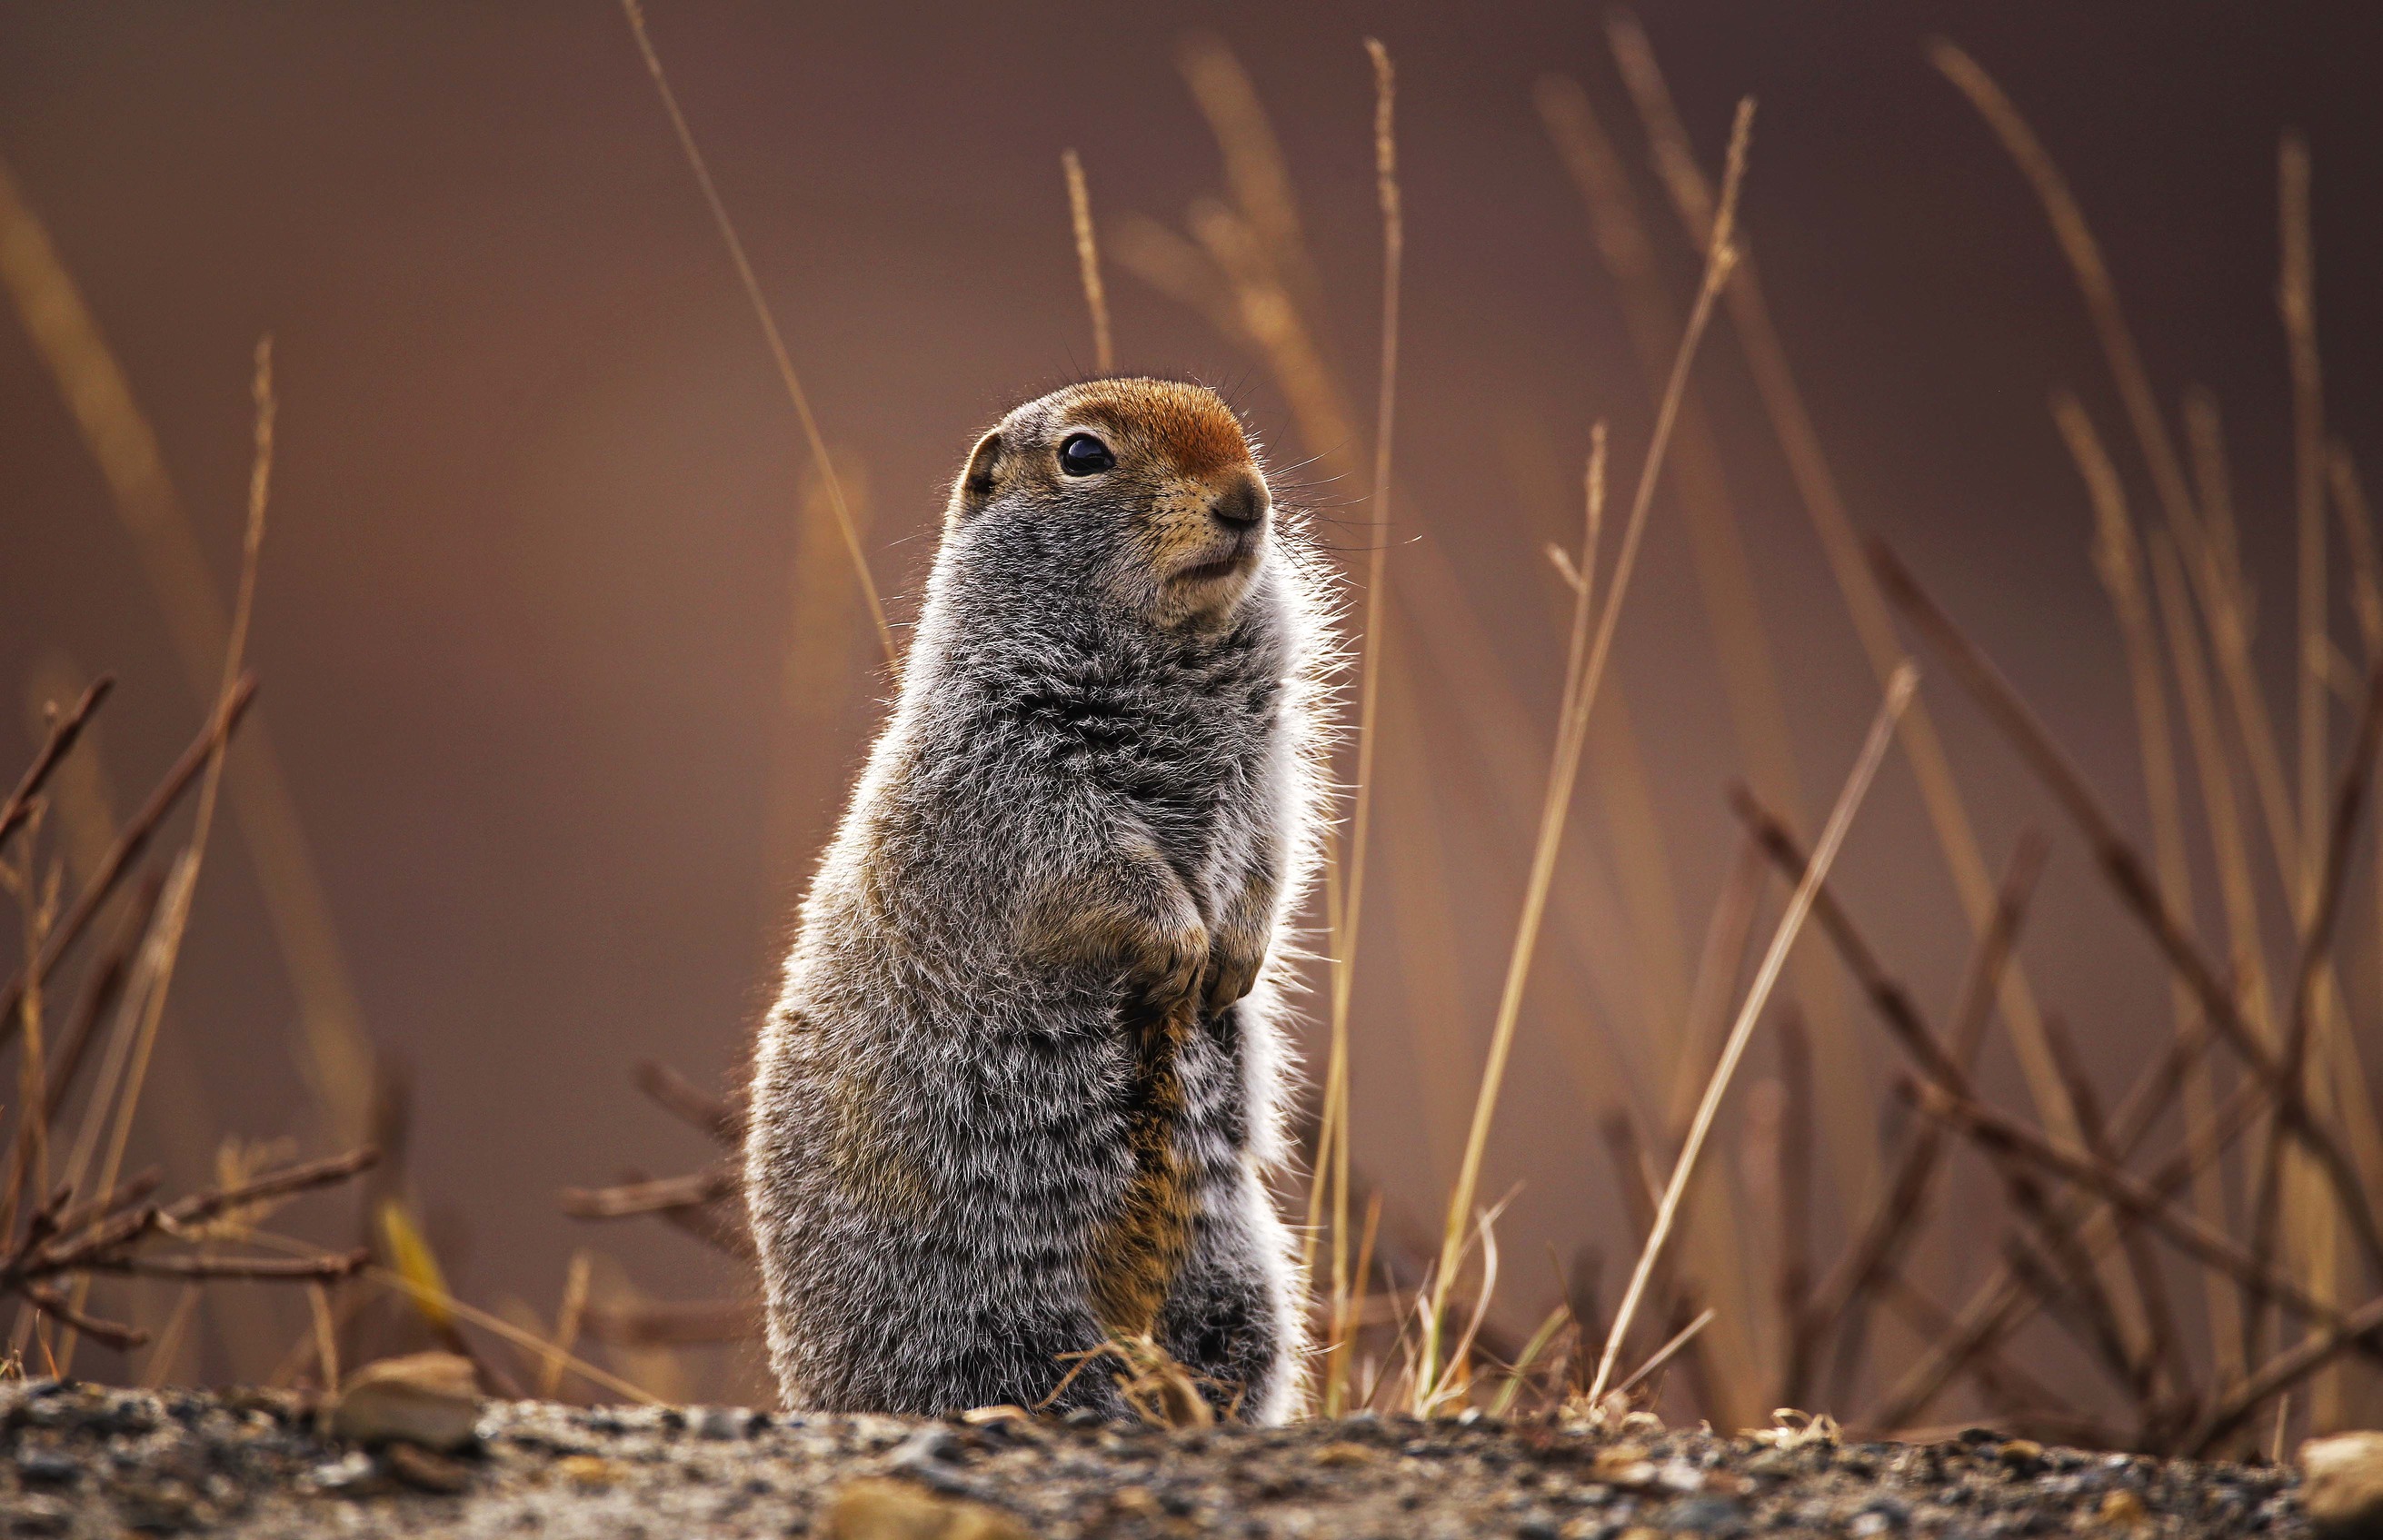 a ground squirrel perched on its hind legs